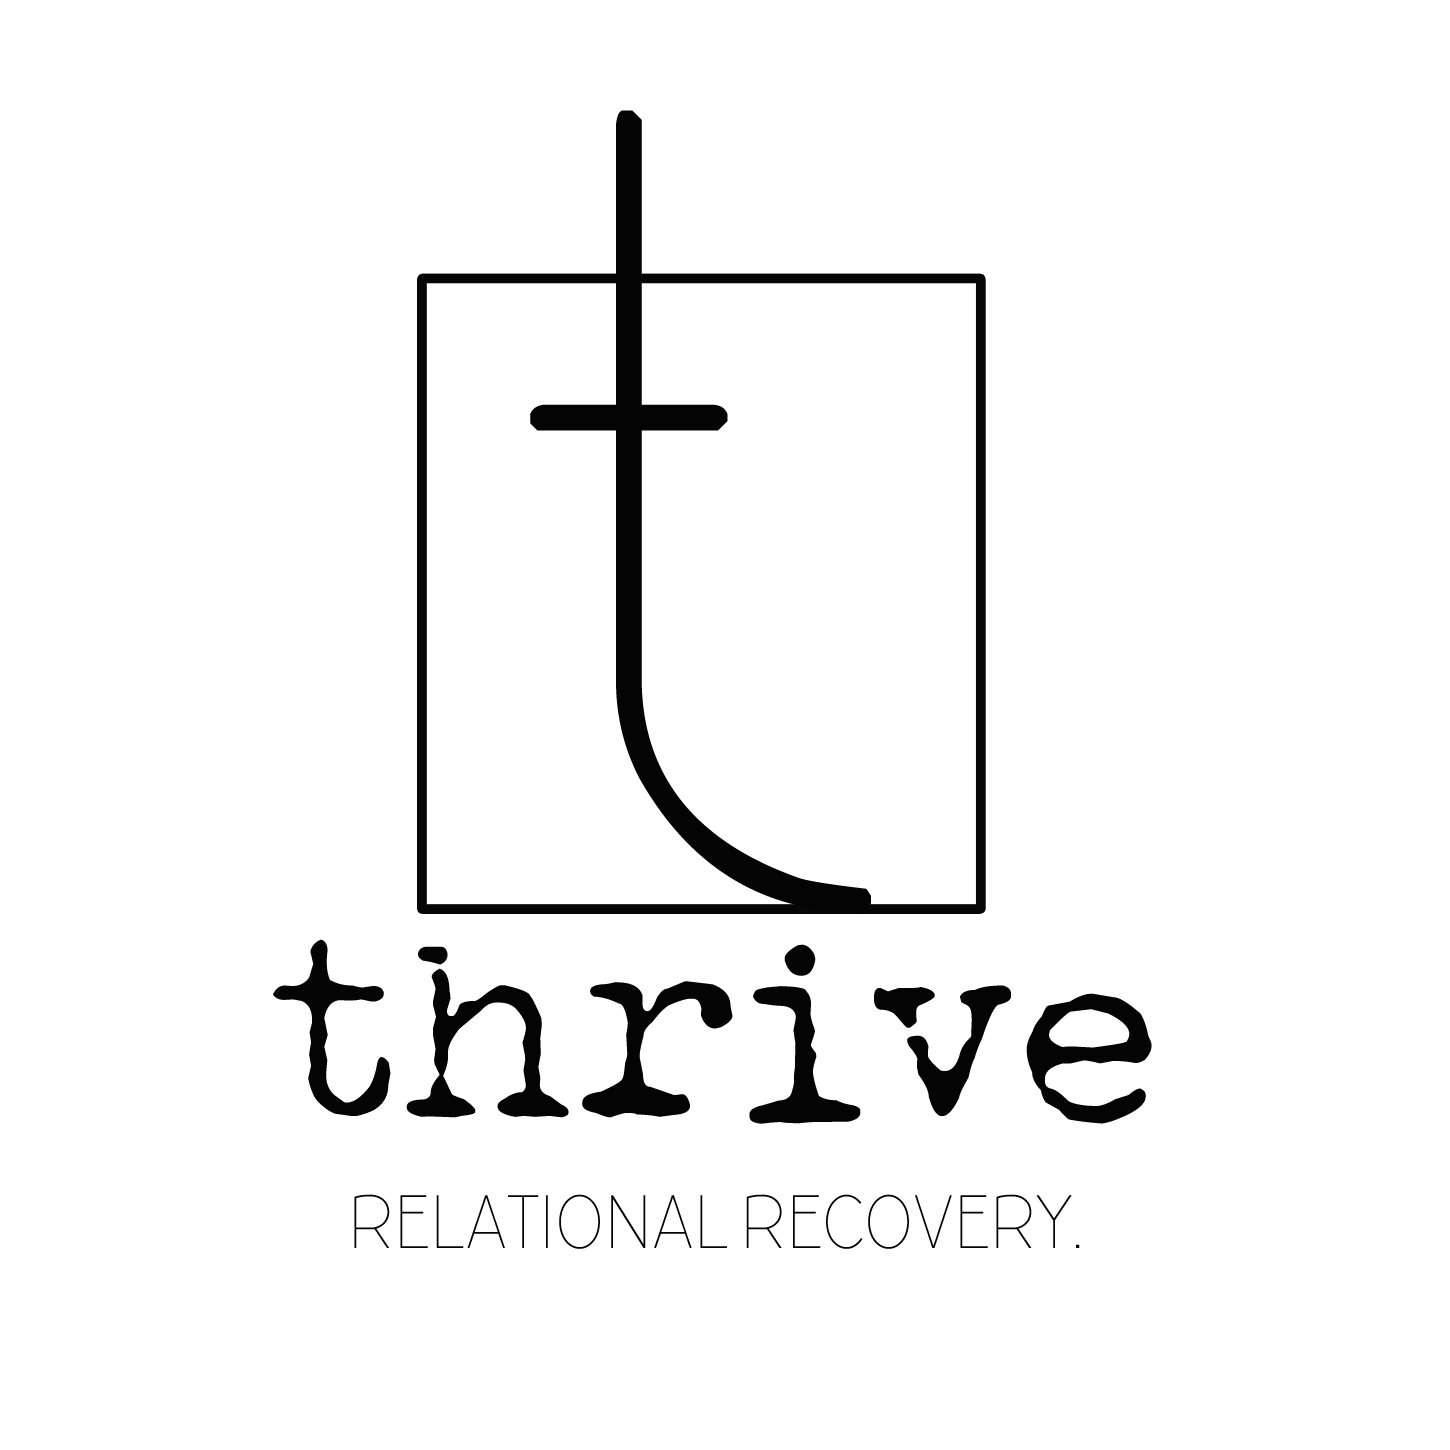 thrive relational recovery - Logo square